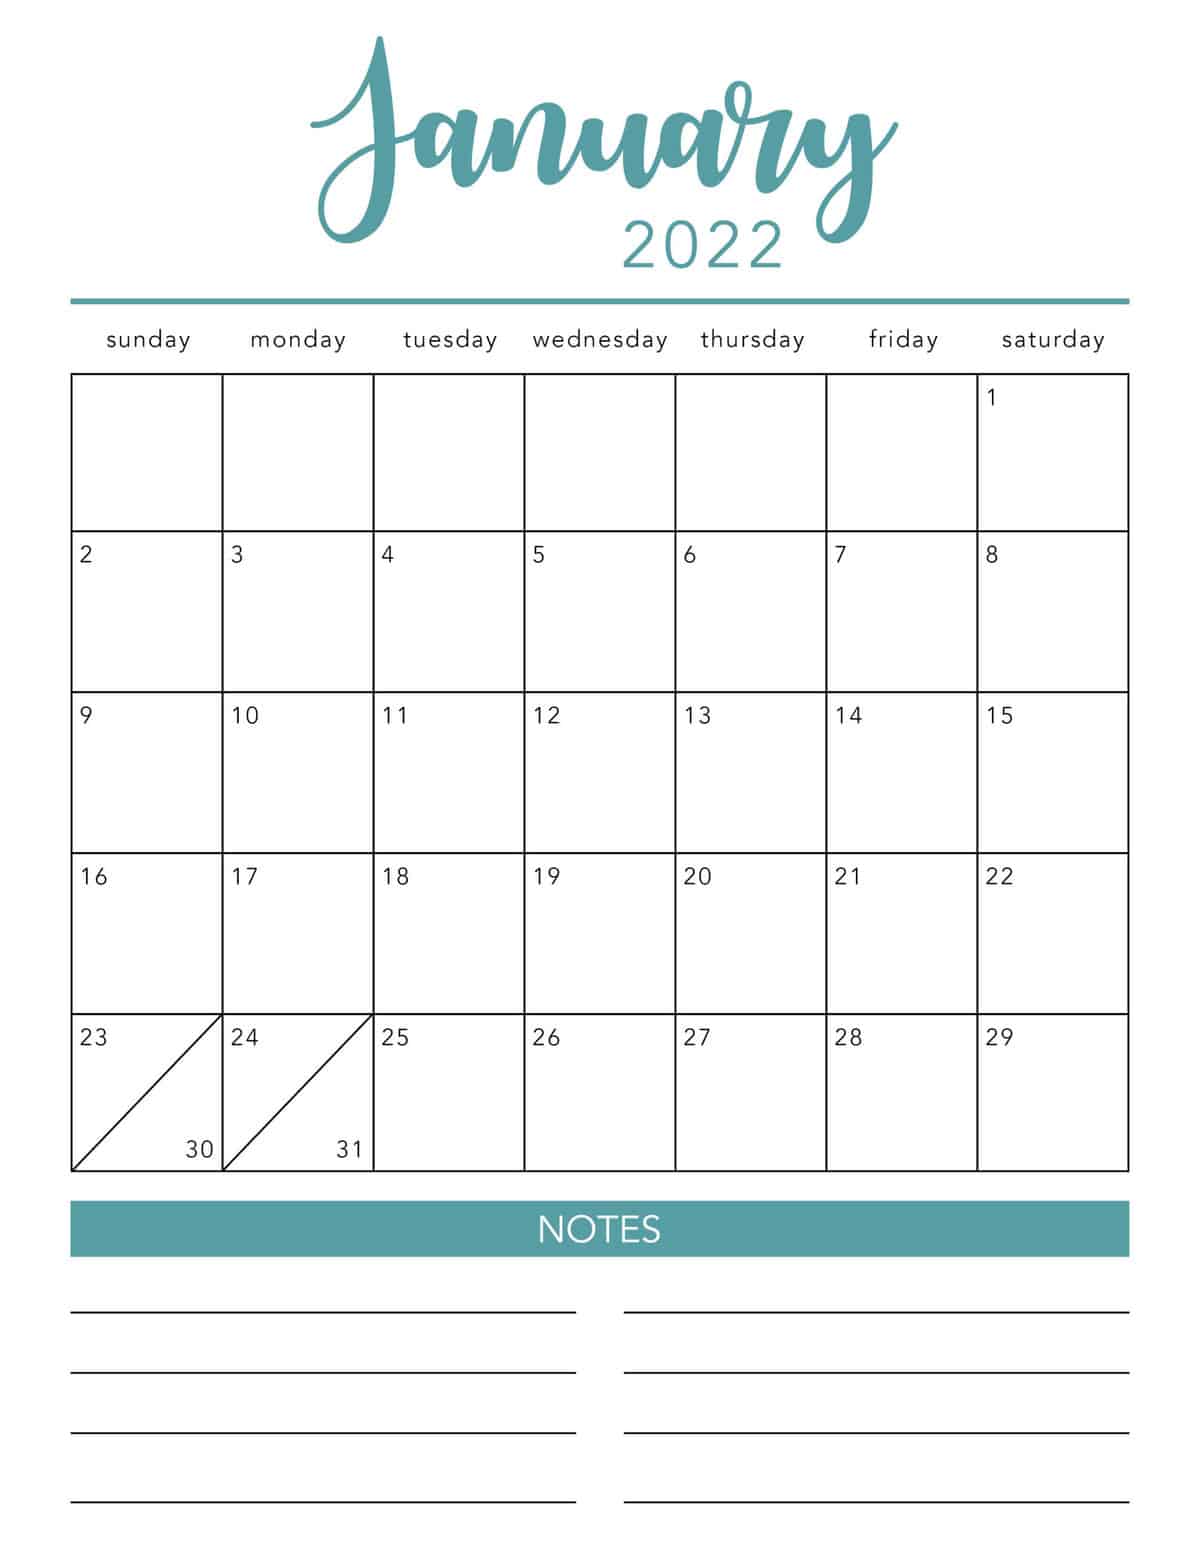 Monthly Calendar 2022 To Print Free 2022 Printable Calendar Template (2 Colors!) - I Heart Naptime